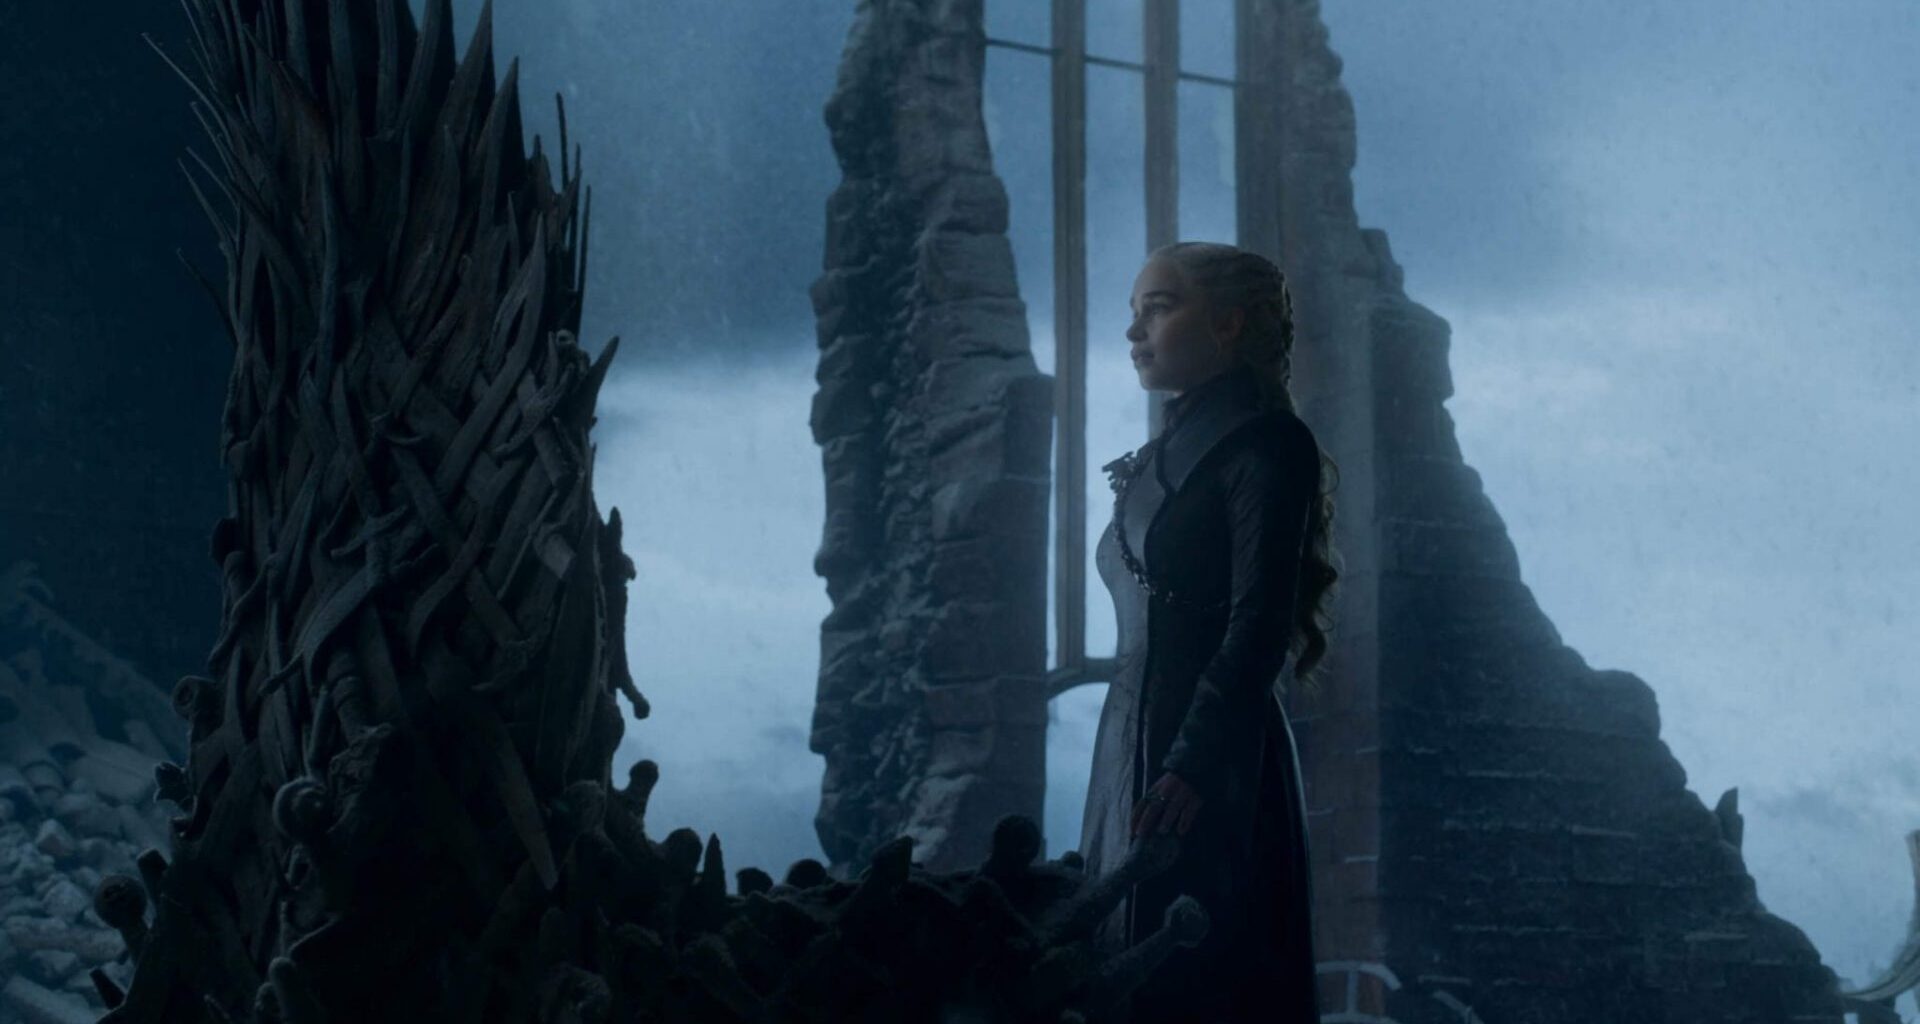 Game of thrones s8 ep 6 post air images 2 5